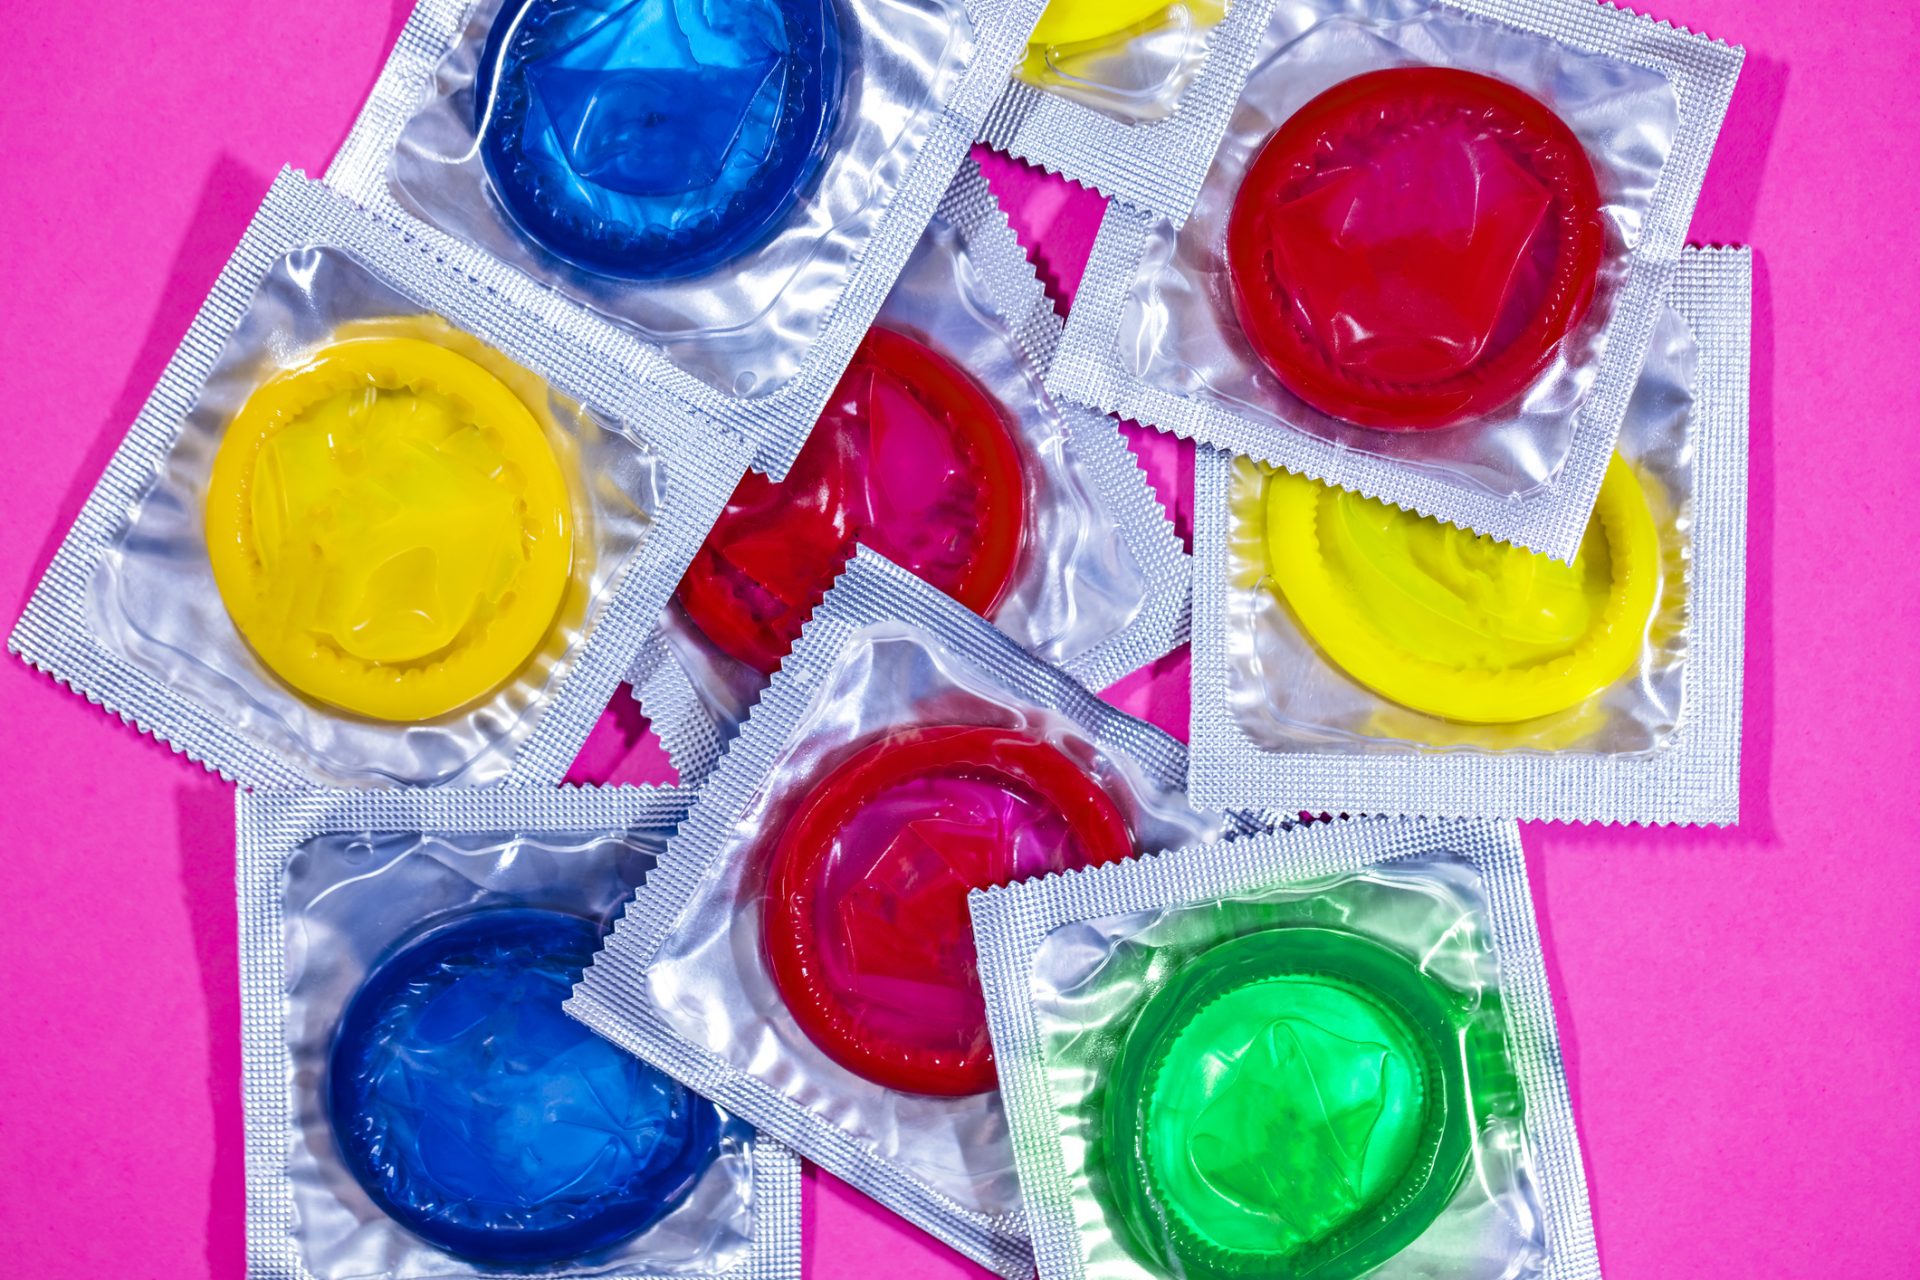 Some contraceptives contain alarming levels of ‘forever chemicals’, study finds